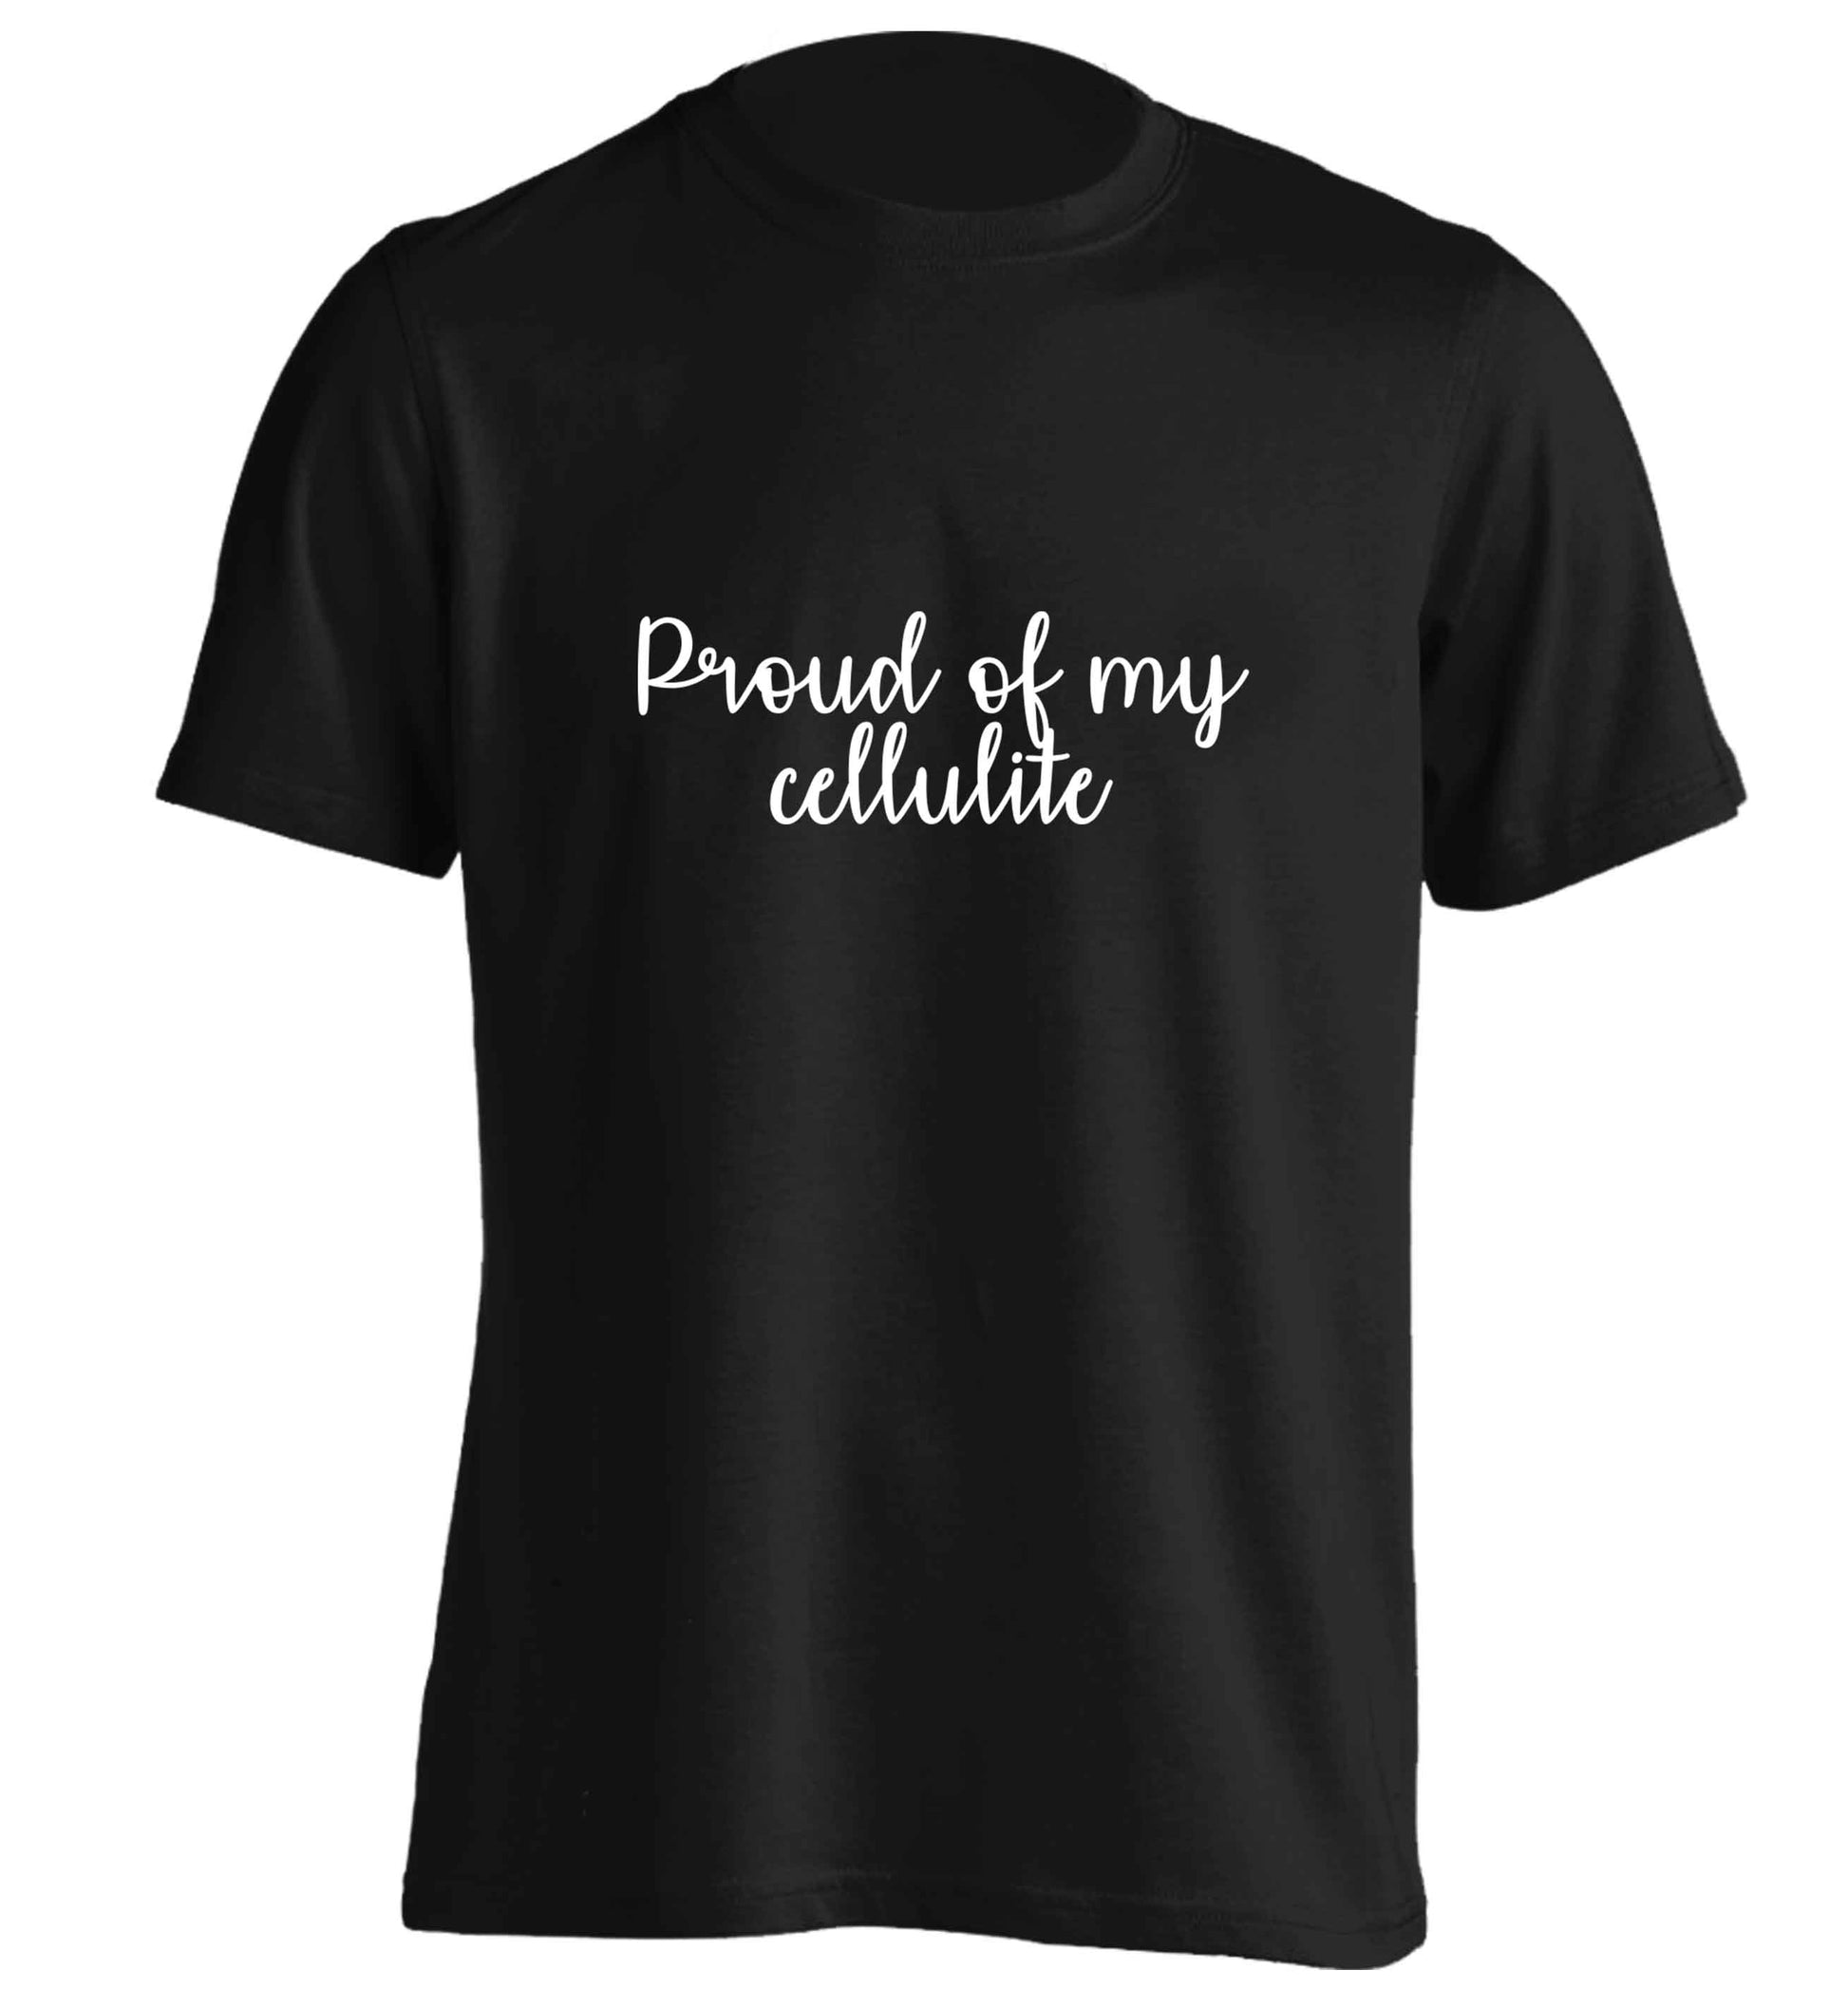 Proud of my cellulite adults unisex black Tshirt 2XL